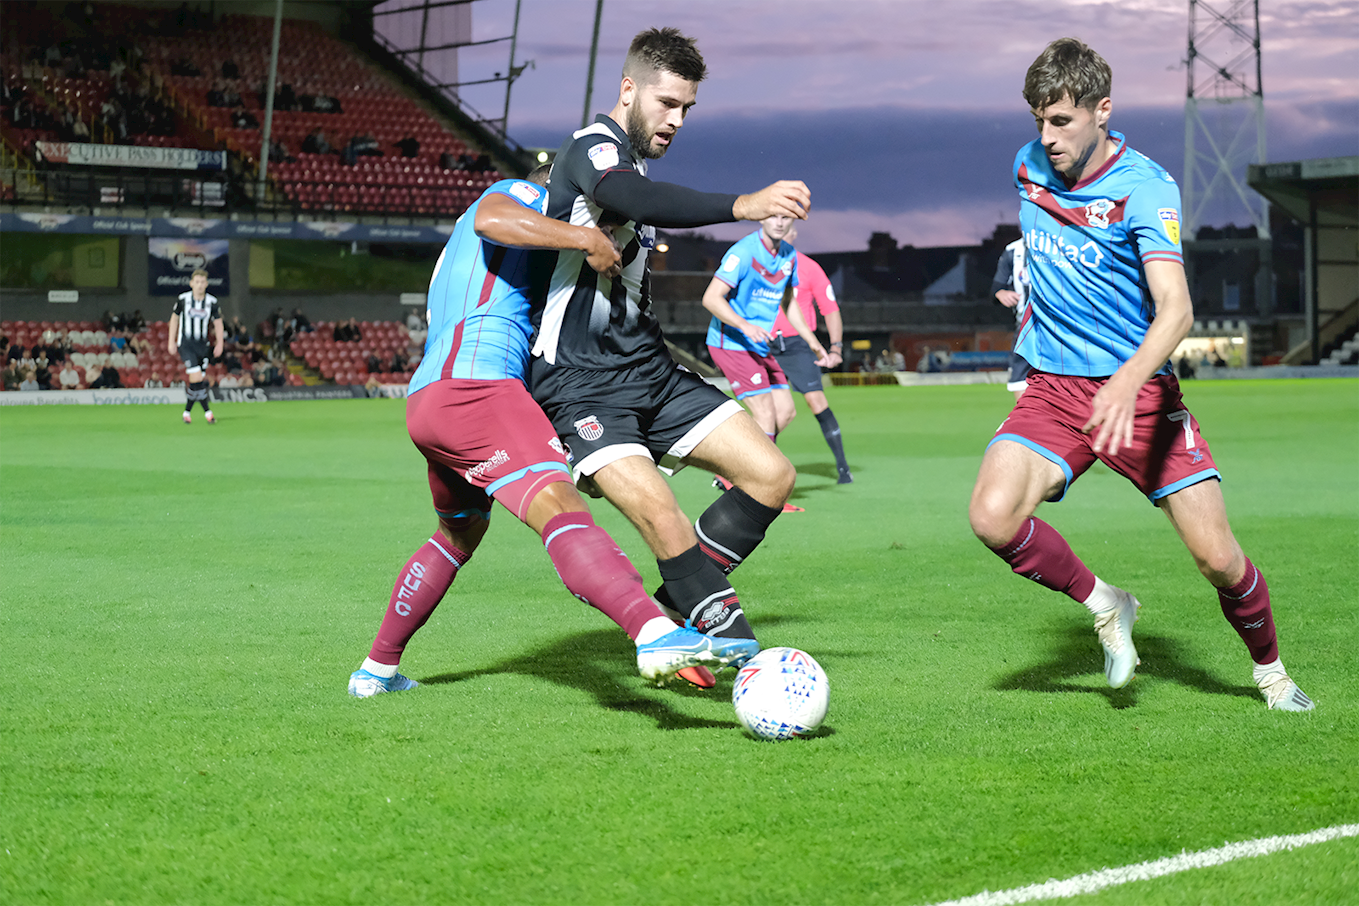 grimsby town players in action